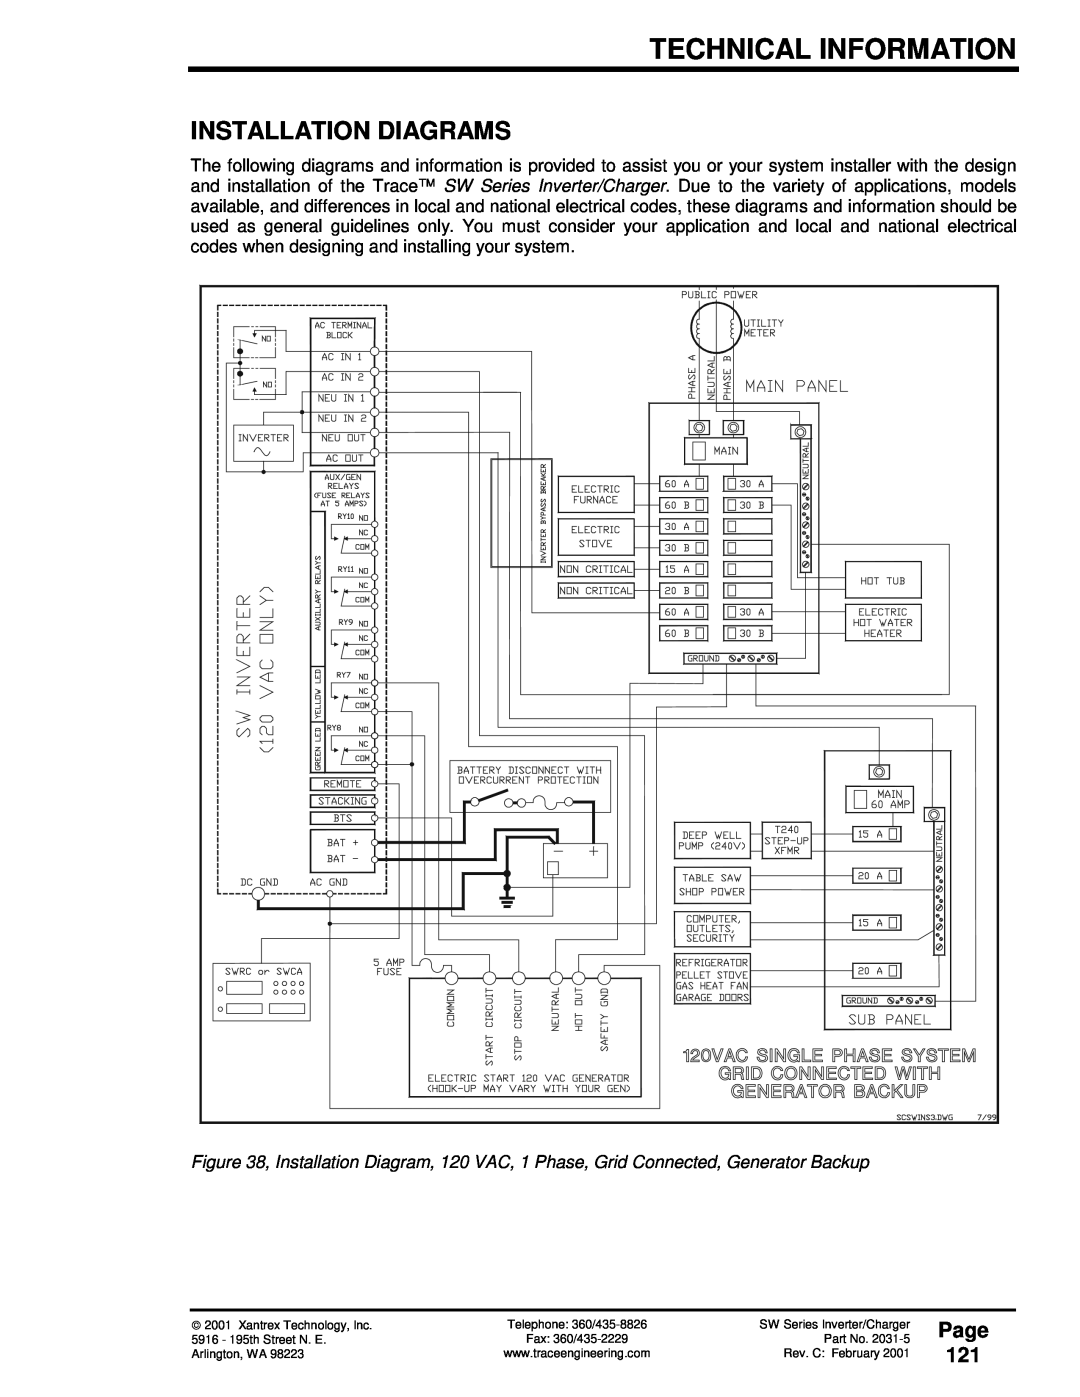 Xantrex Technology SW Series owner manual Installation Diagrams, Page 121, Technical Information 